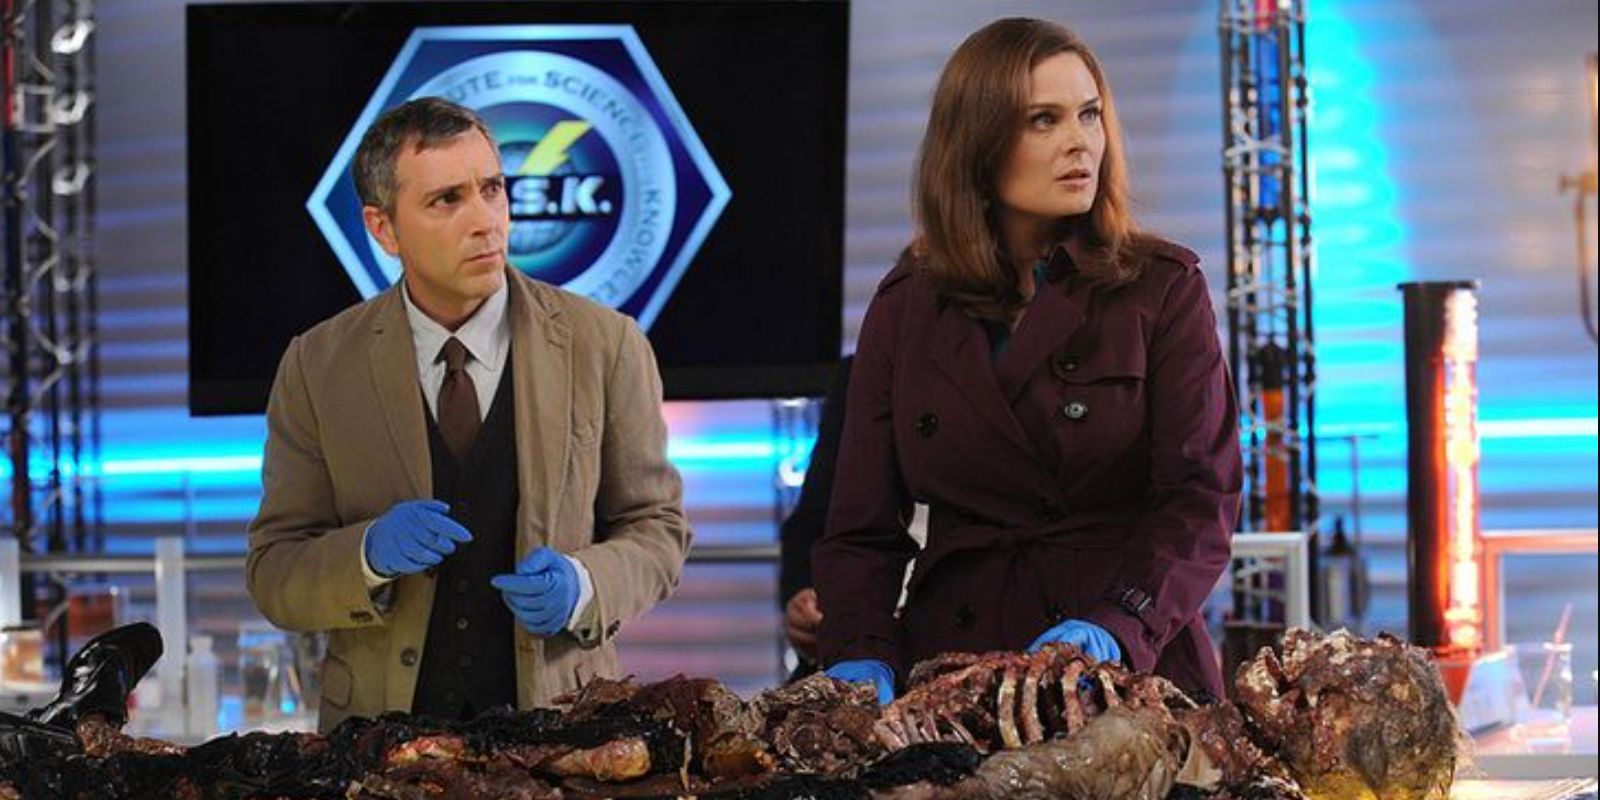 Douglas Filmore alongside Temperance Brennan as they examine remains on a tv show set in Bones